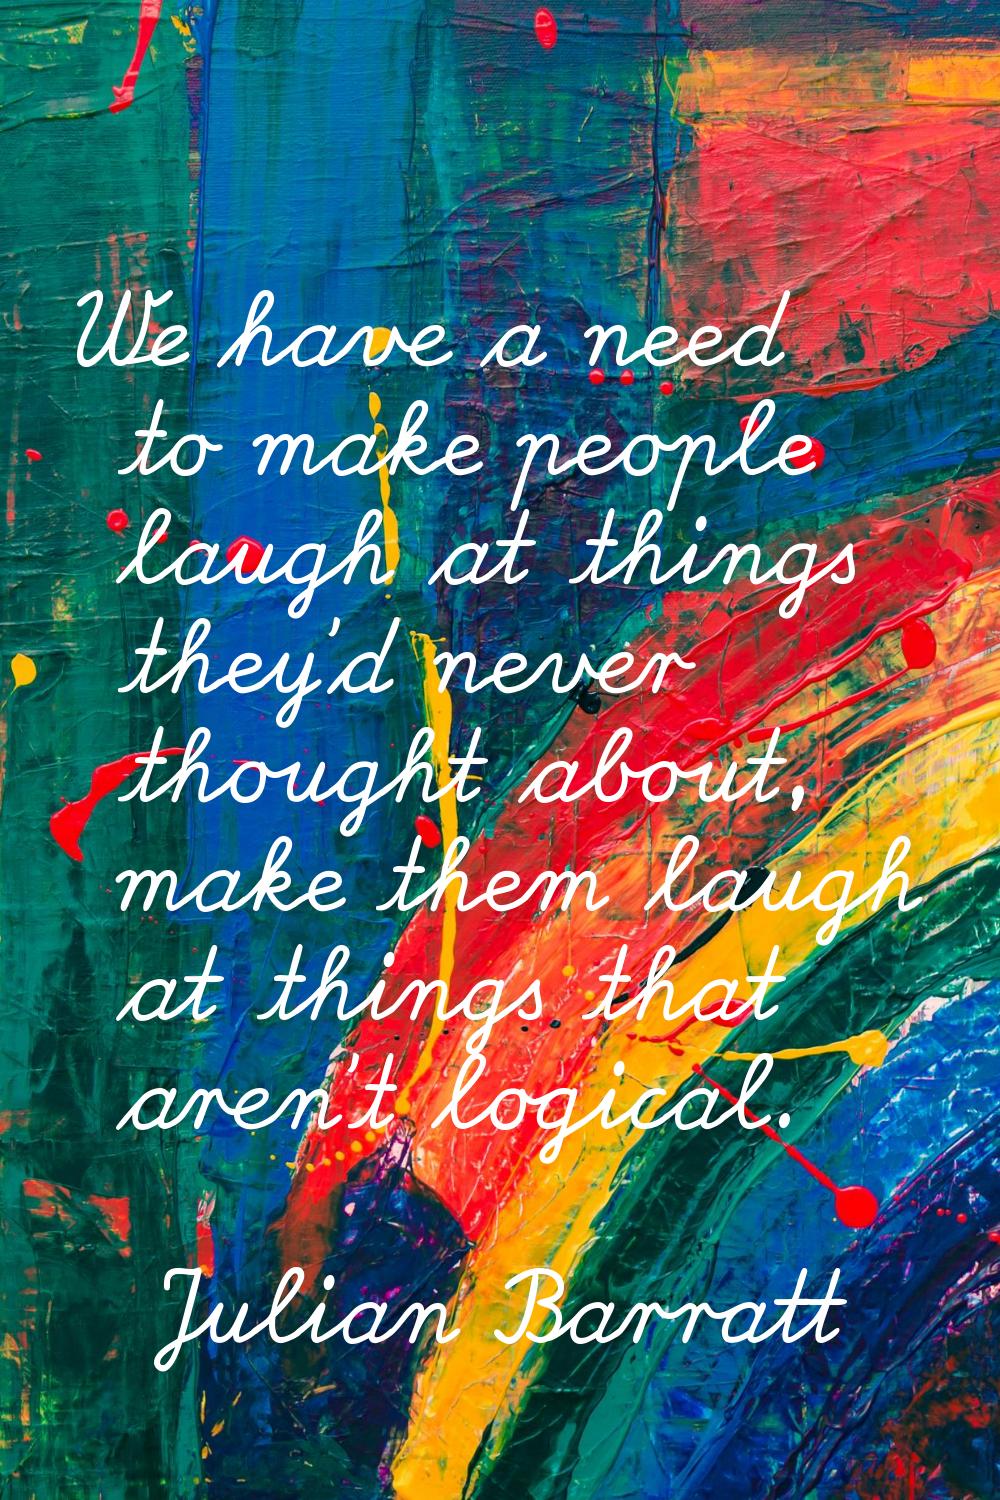 We have a need to make people laugh at things they'd never thought about, make them laugh at things